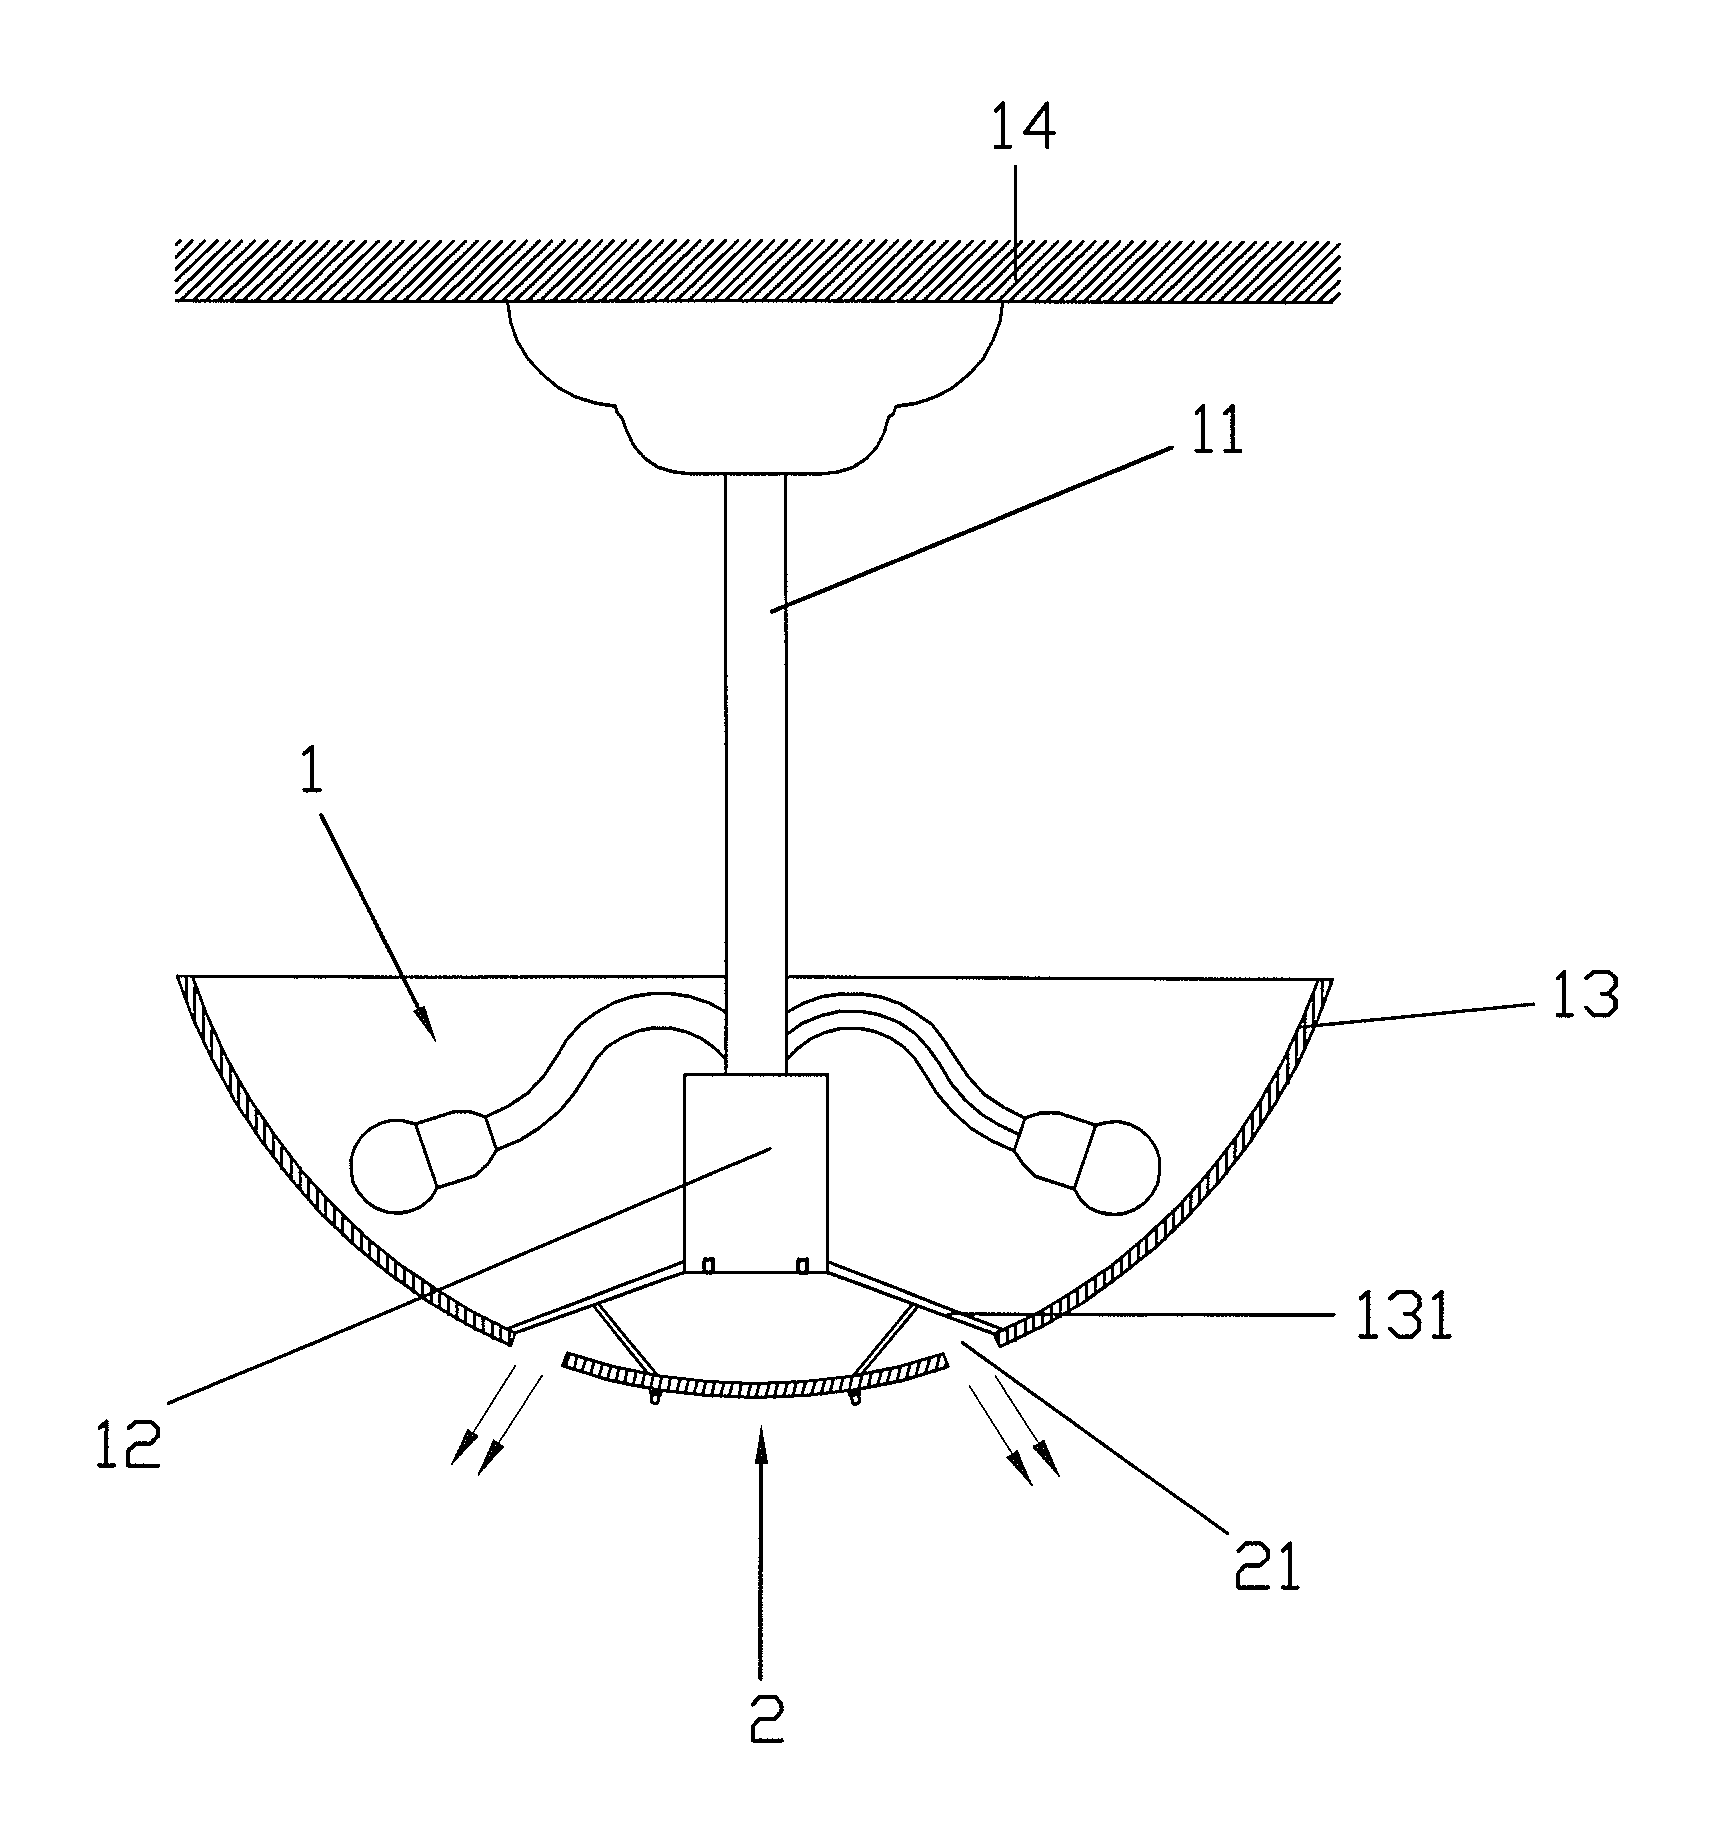 Pendent lamp having an air conditioning function